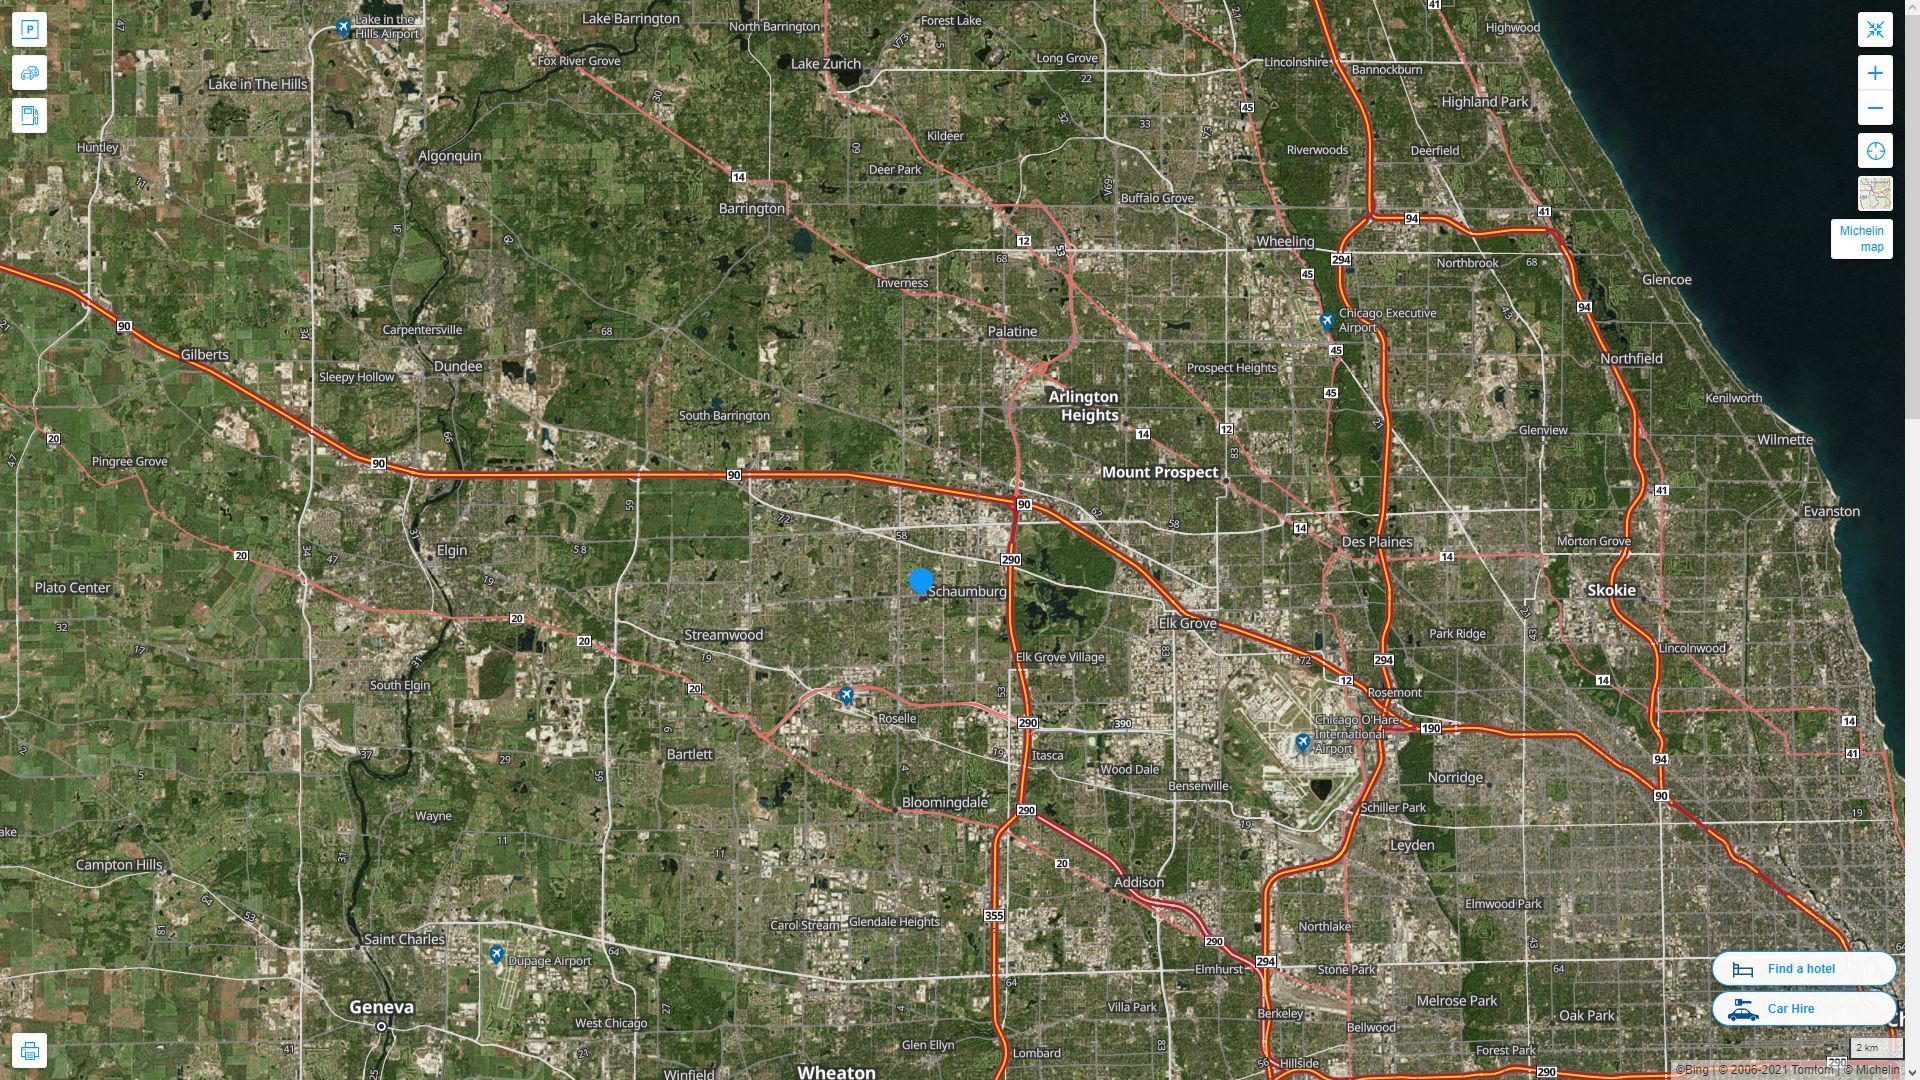 Schaumburg illinois Highway and Road Map with Satellite View